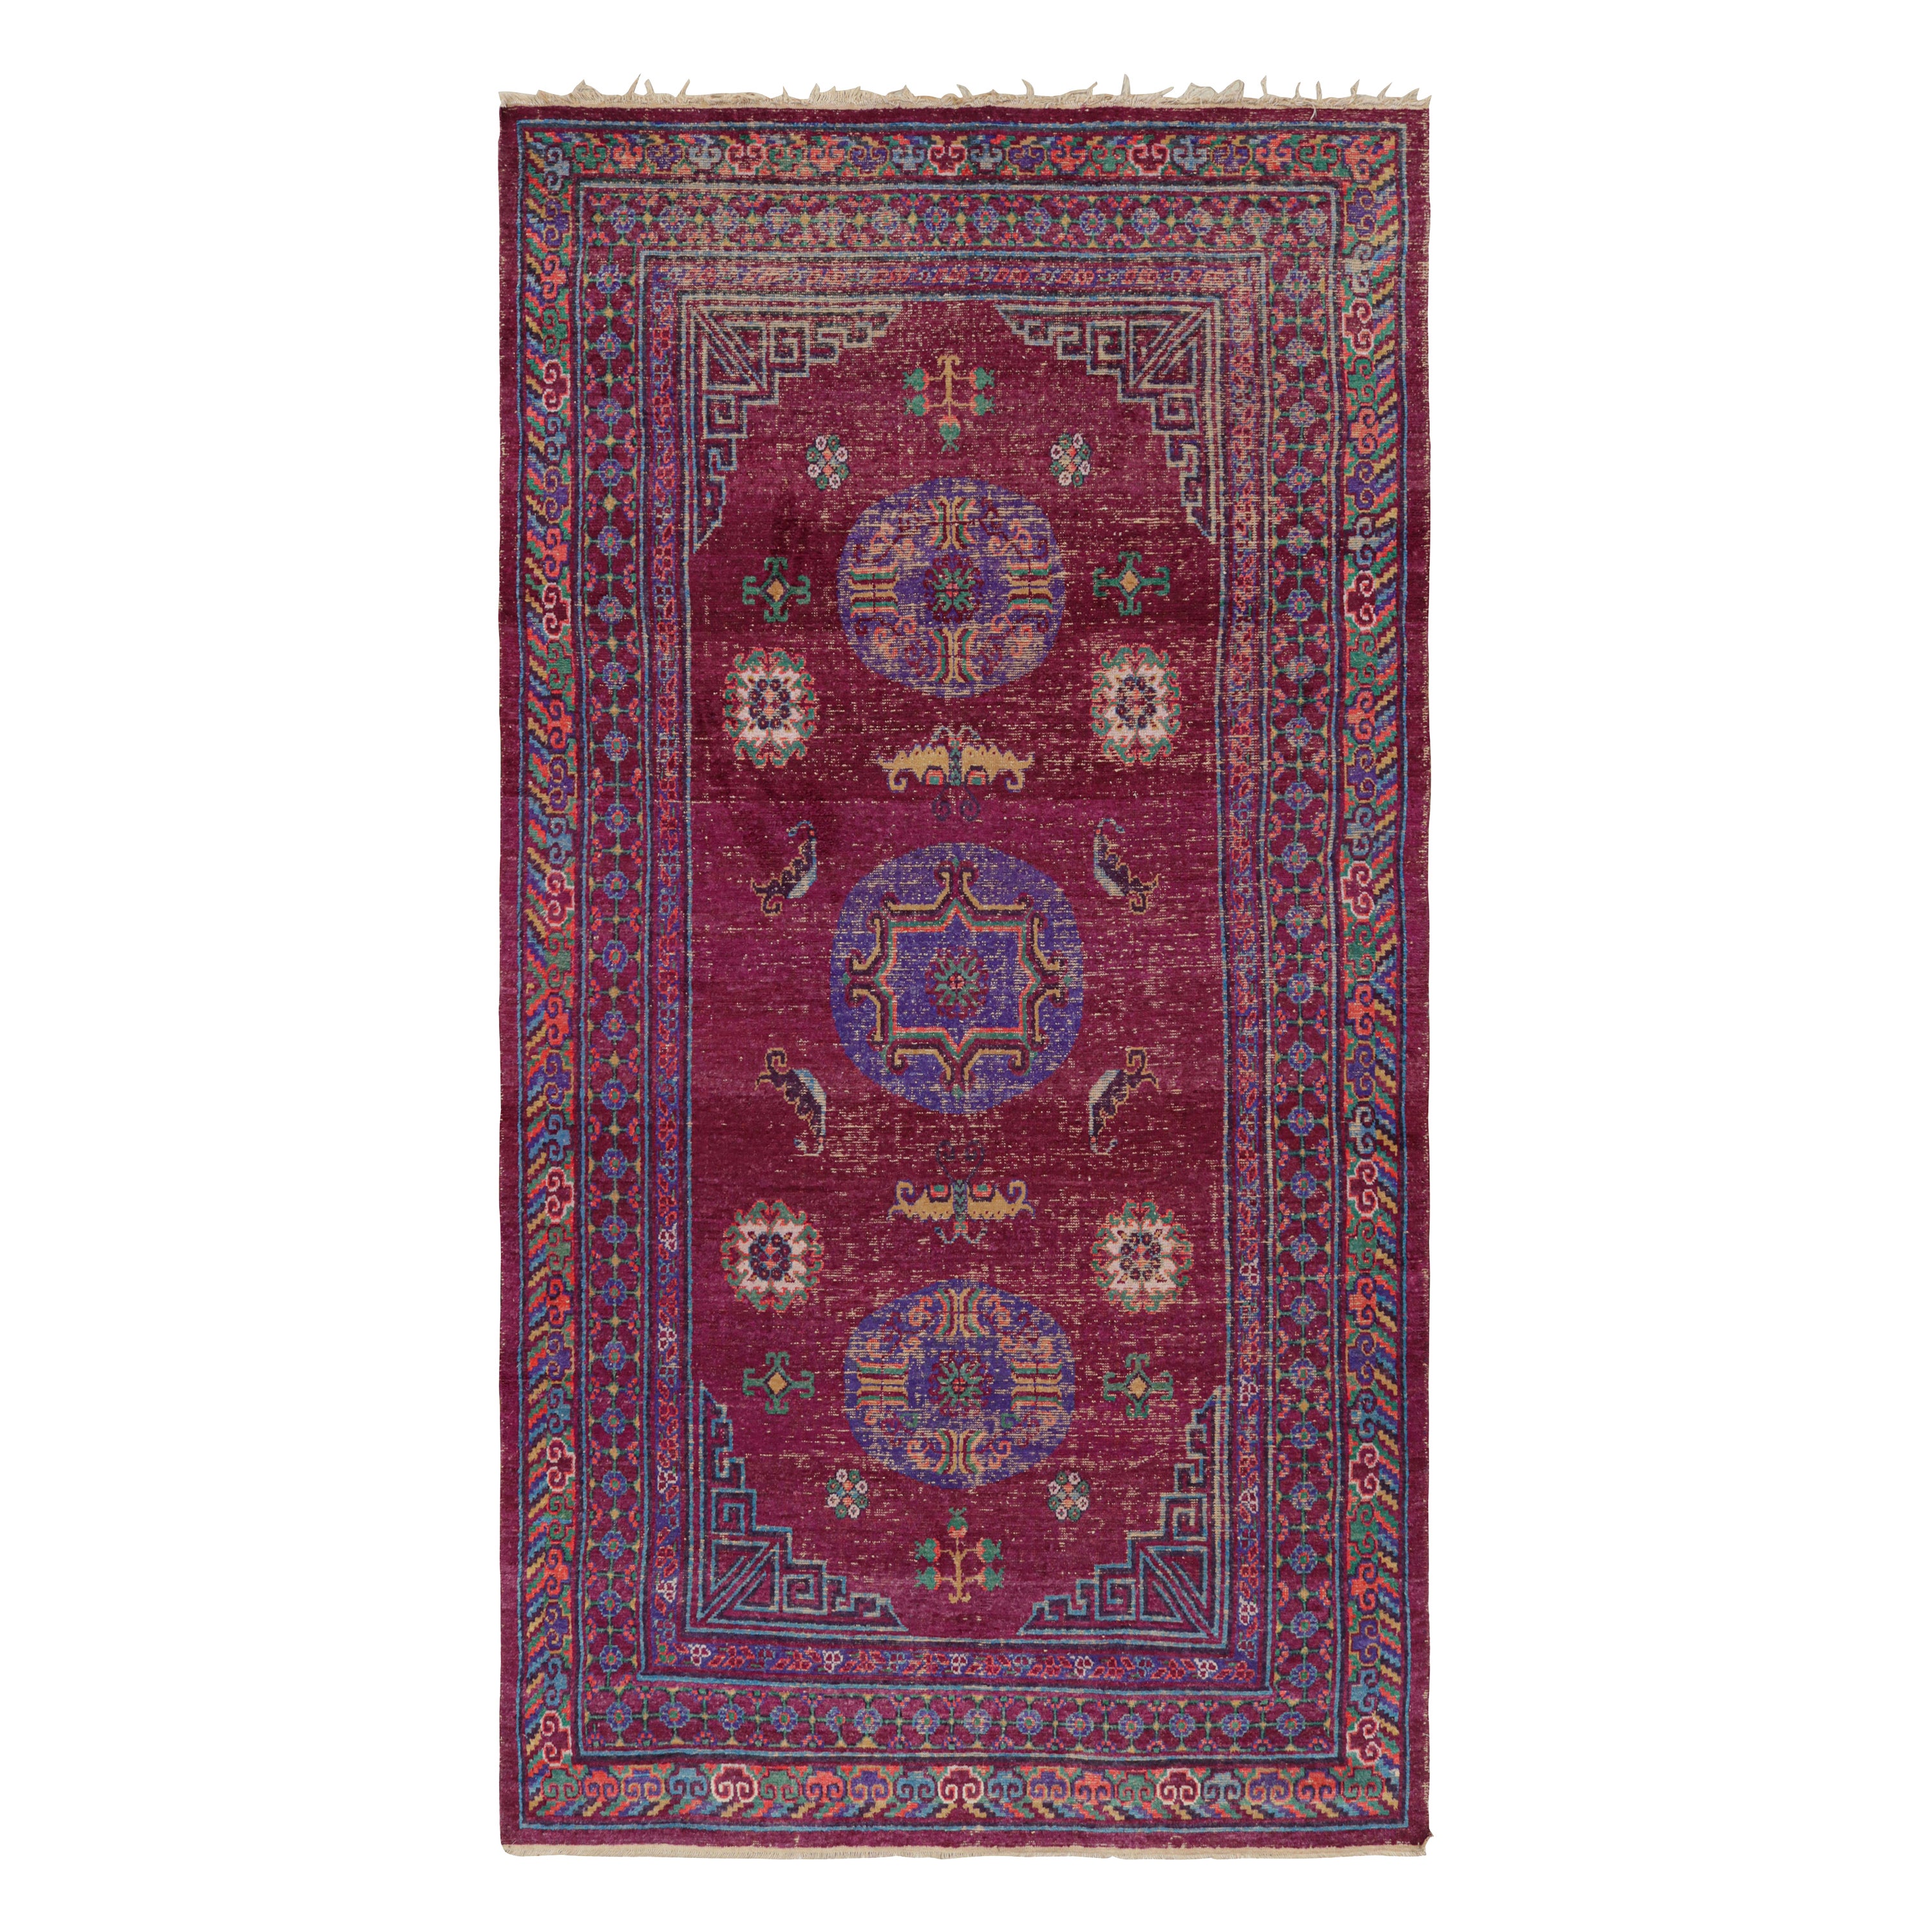 Antique Khotan Rug in Burgundy with Medallions and Pictorials, from Rug & Kilim